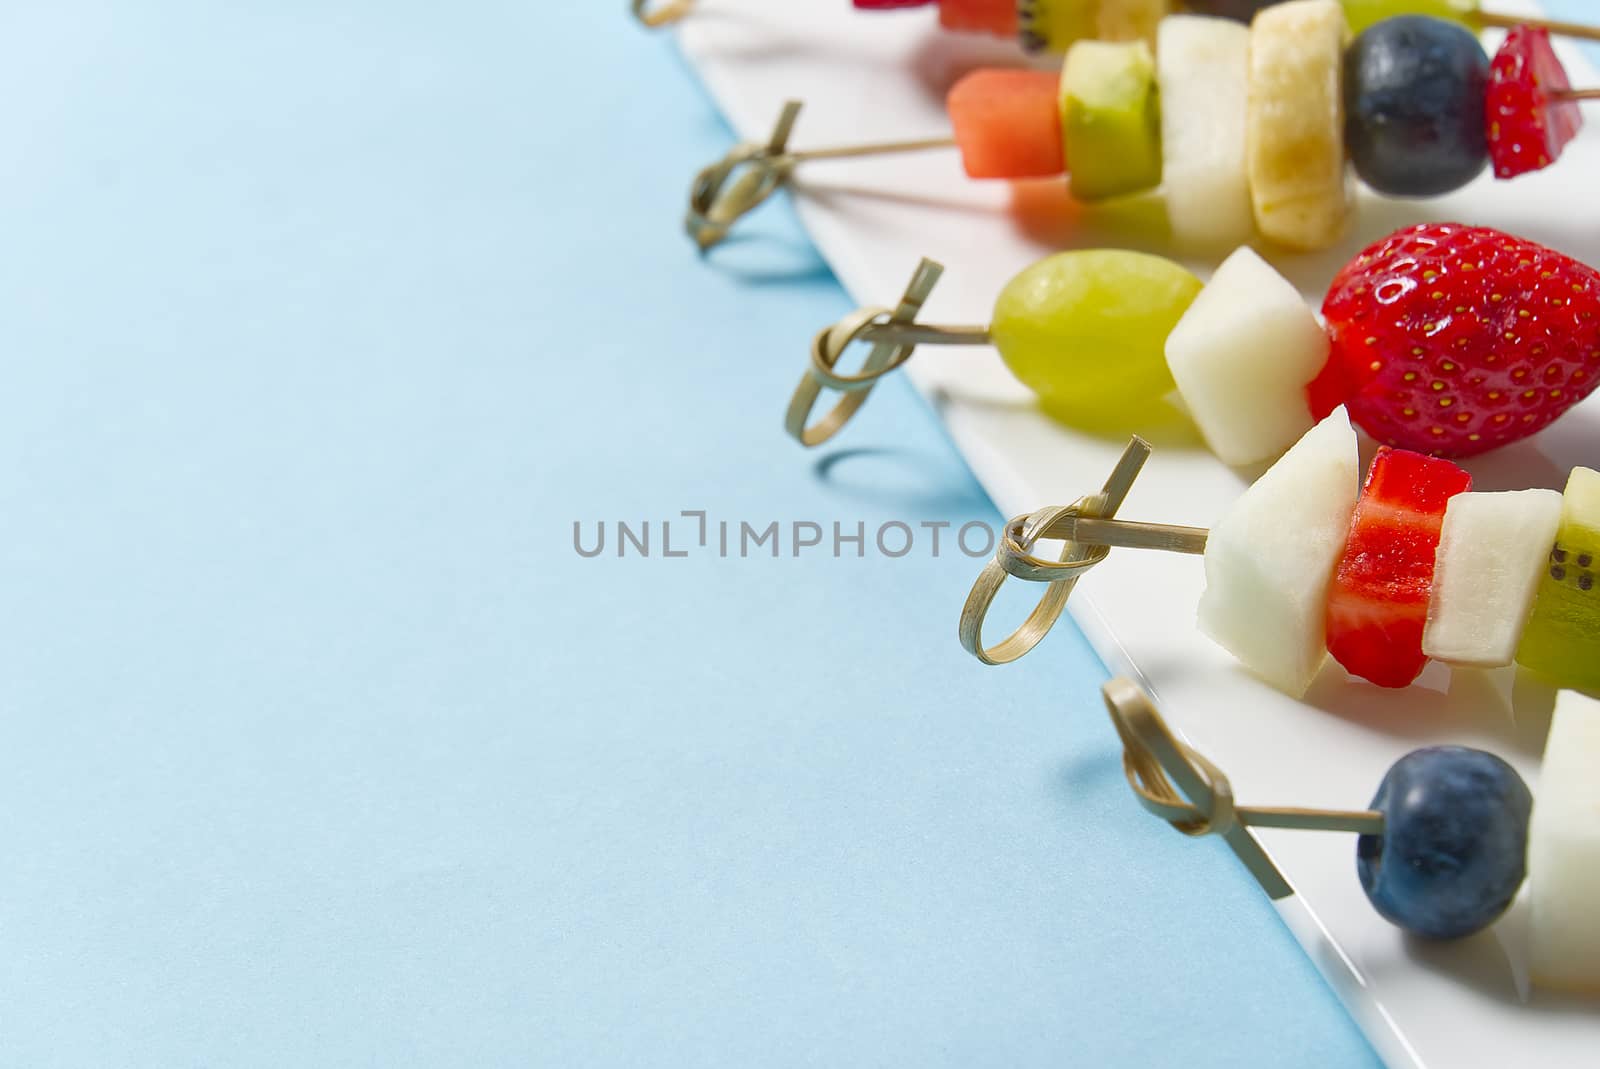 Fruit canapes. Fresh fruit canapes on white plate. Mixed fruit in white plate healthy food style, blue backgrounds